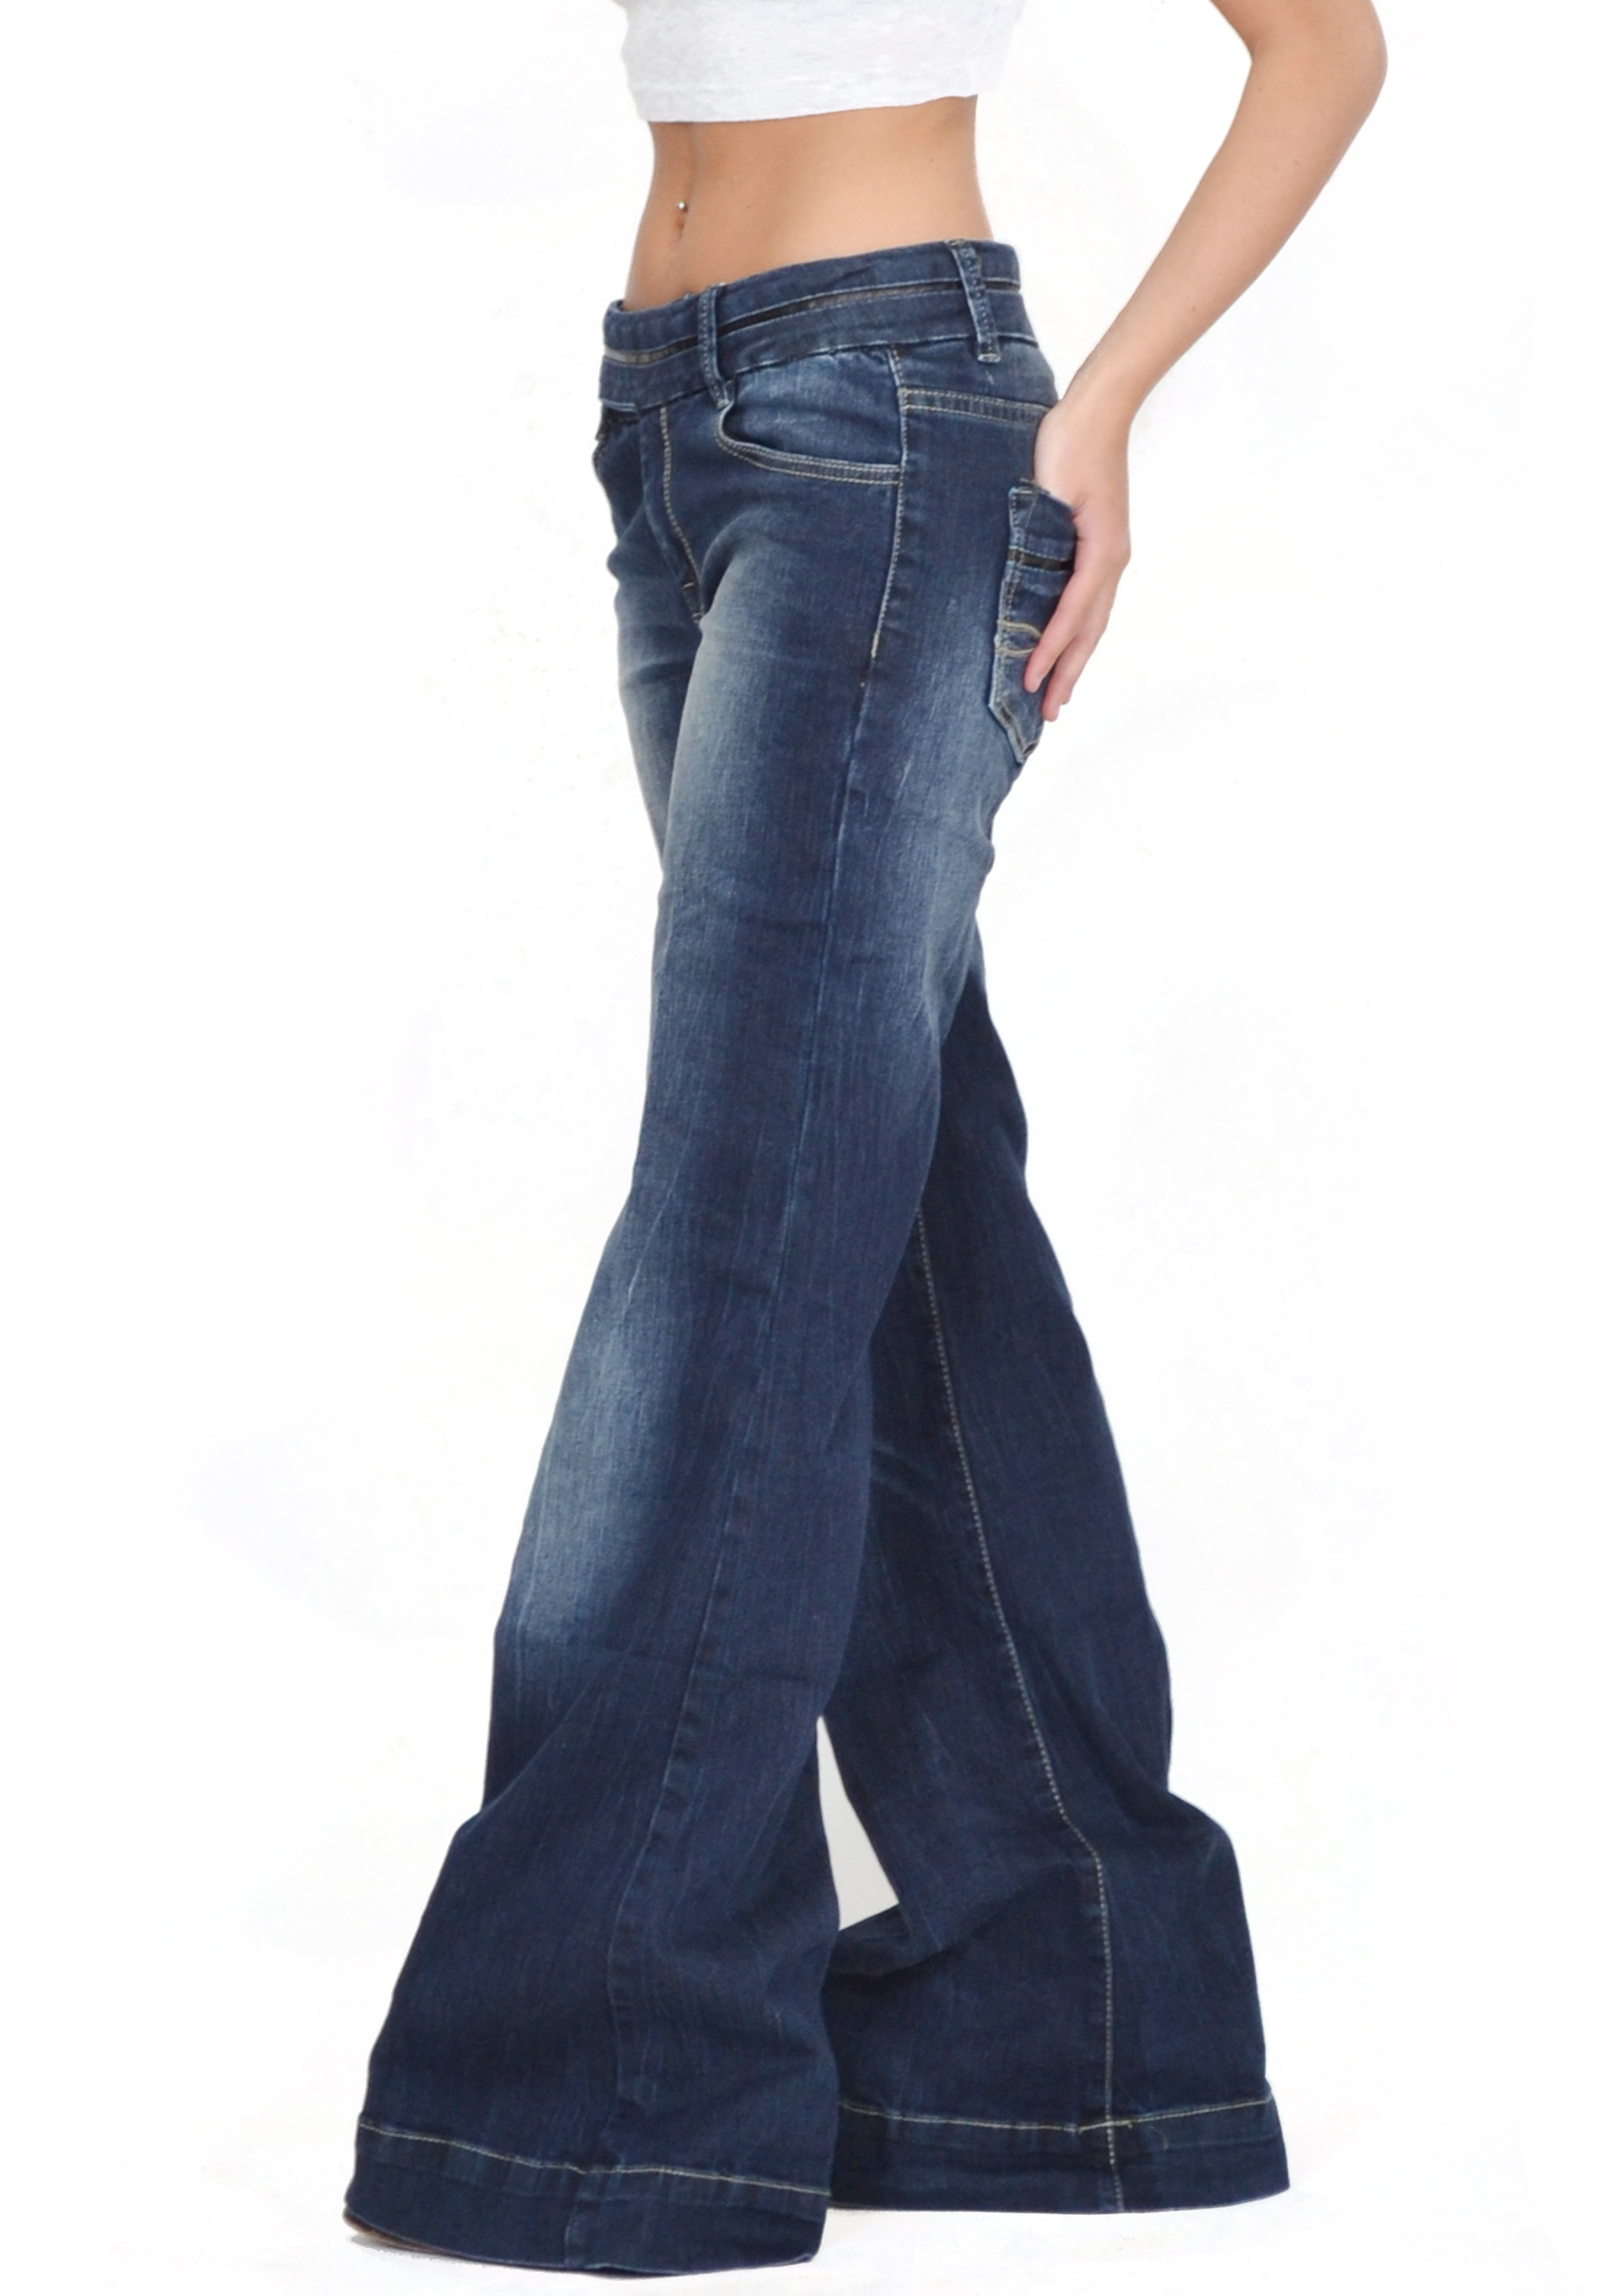 New 60s 70s Retro Dark Blue Faded Bell Bottoms Hippy Flares Wide Flared ...